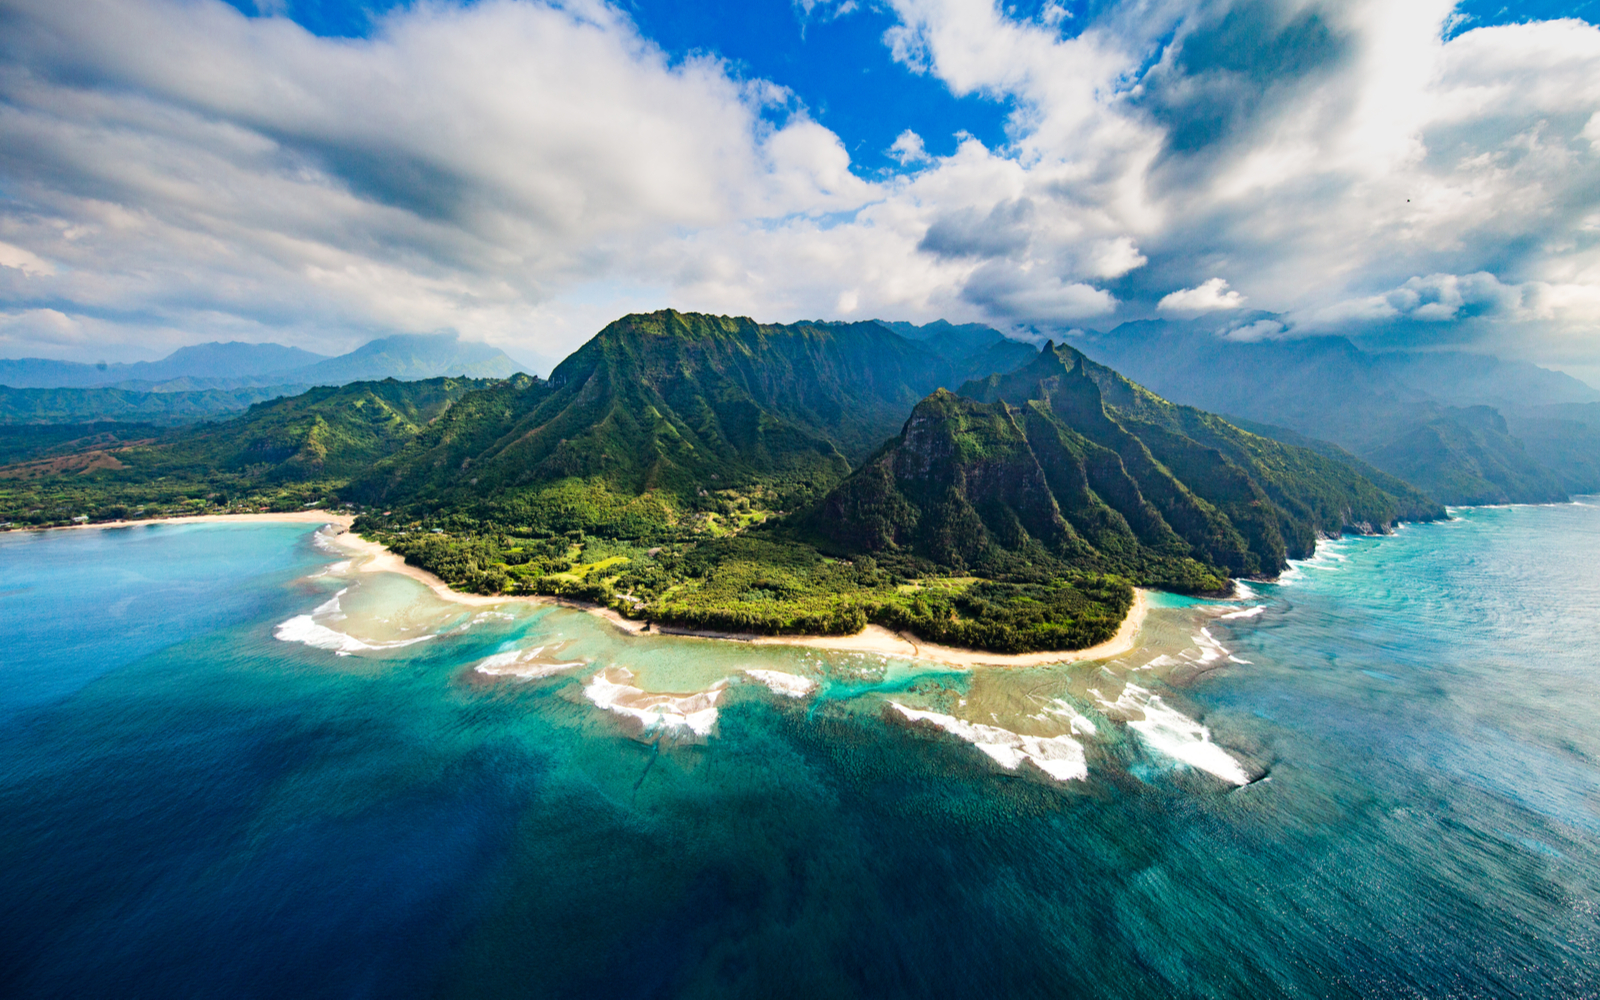 As an image for a piece on where to stay in Kauai, an aerial shot of the gorgeous island